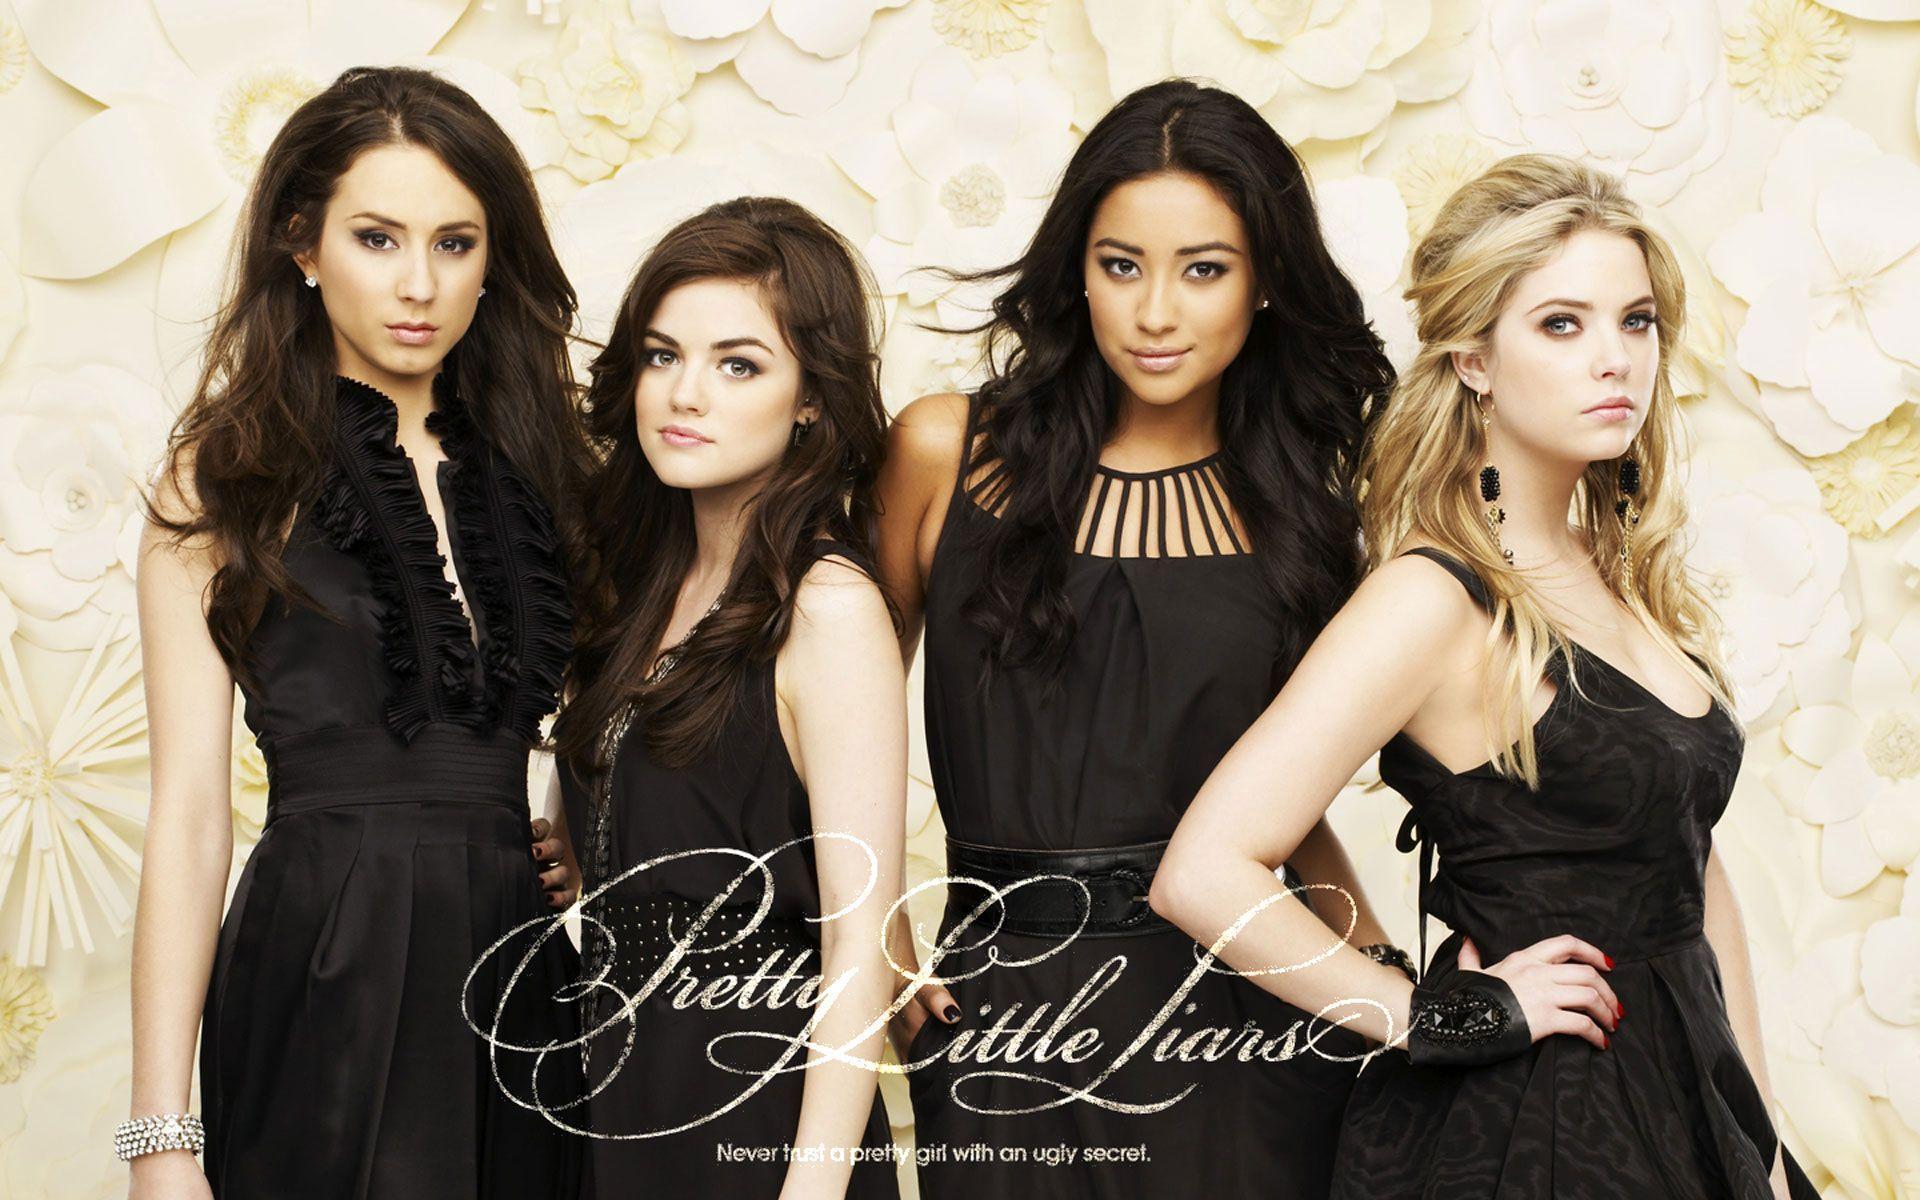 2. "A" Nail Art Design from "Pretty Little Liars" - wide 5